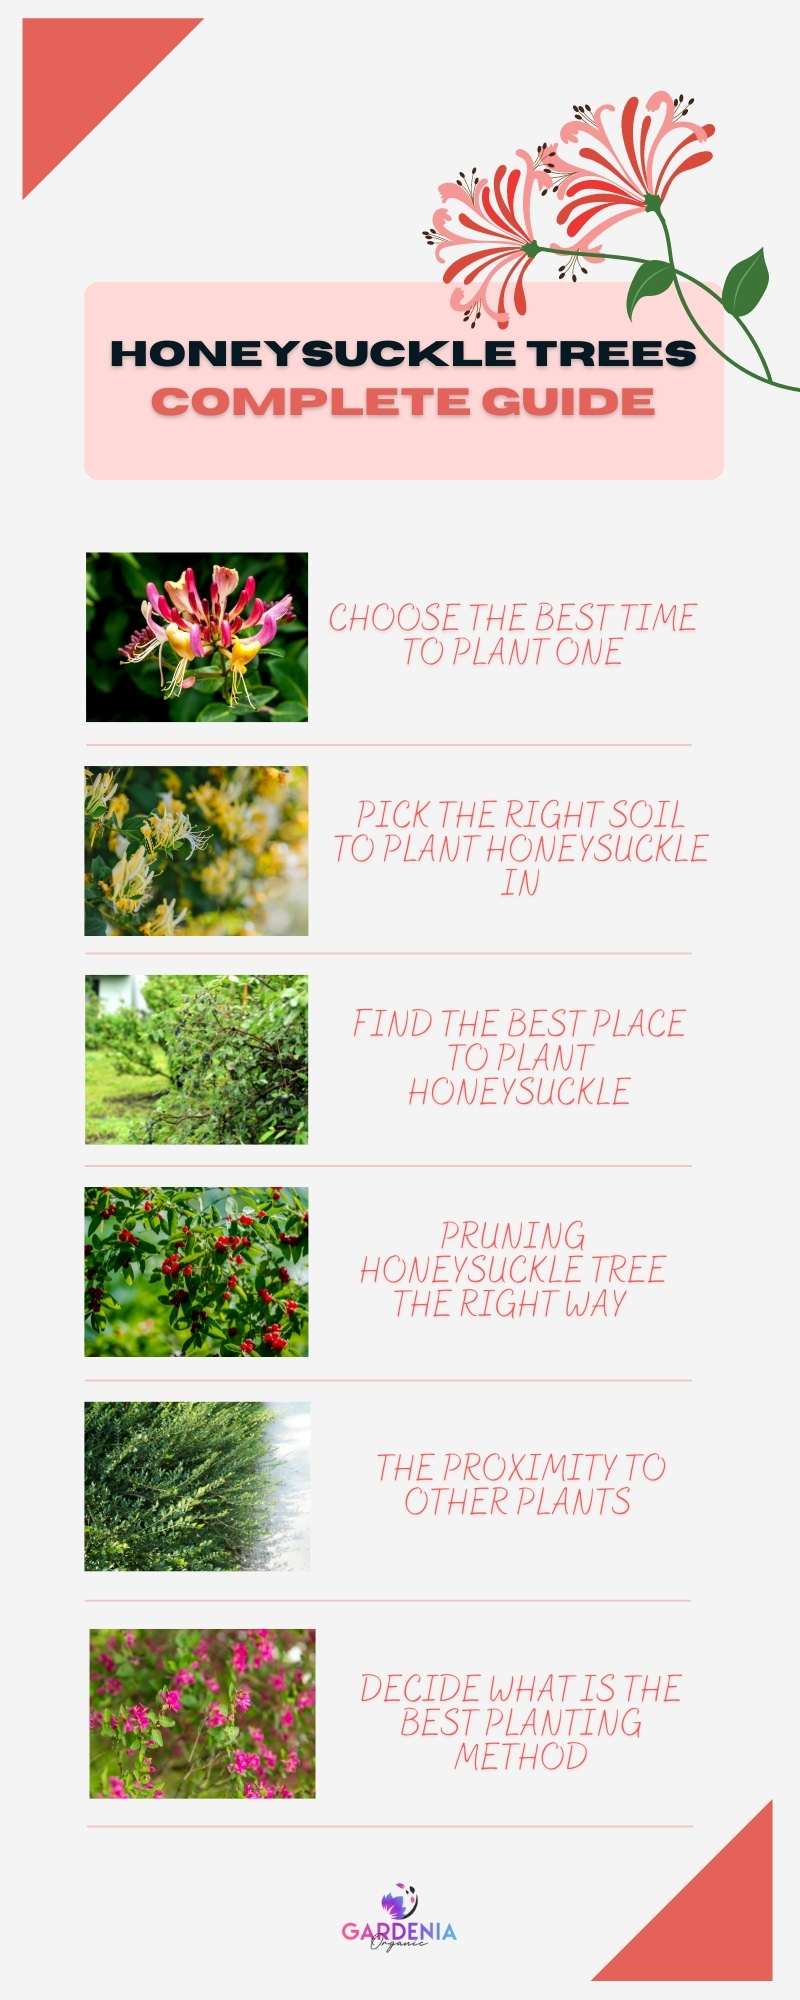 Caring for Honeysuckle tree